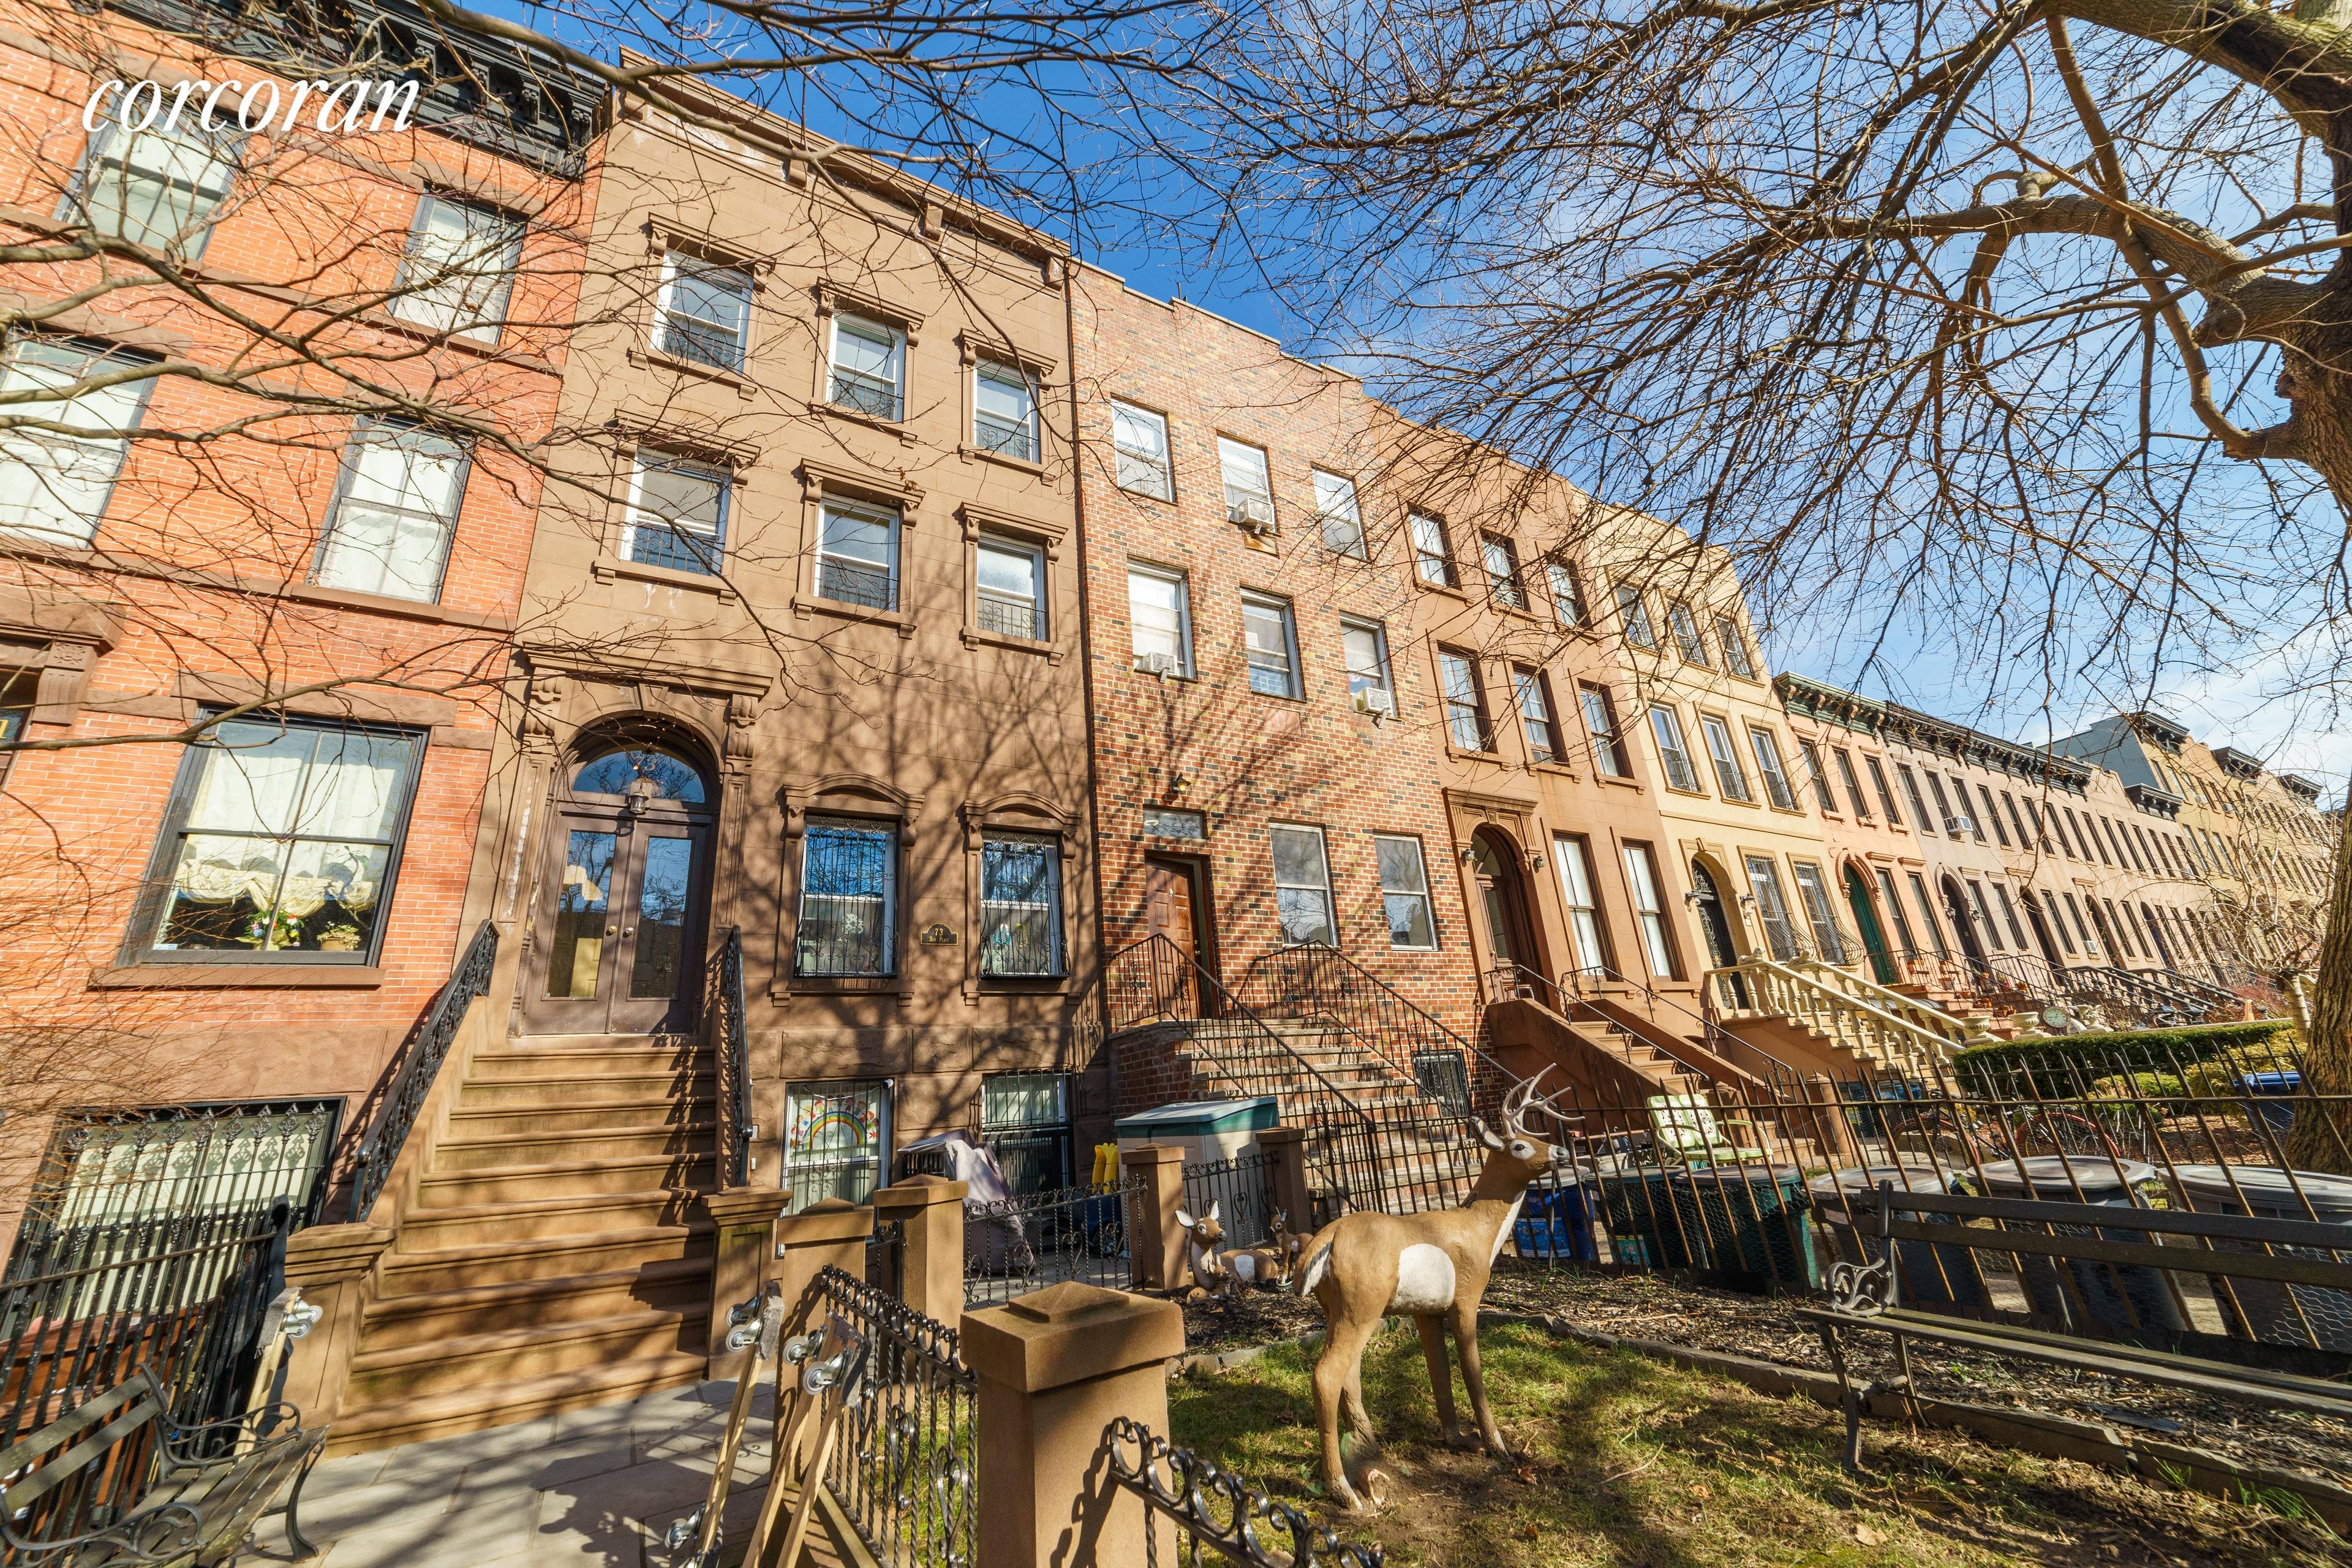 An incredible opportunity 73 3rd Place in prime Carroll Gardens is an enormous 4 story, 4 family meticulously maintained and updated brownstone.